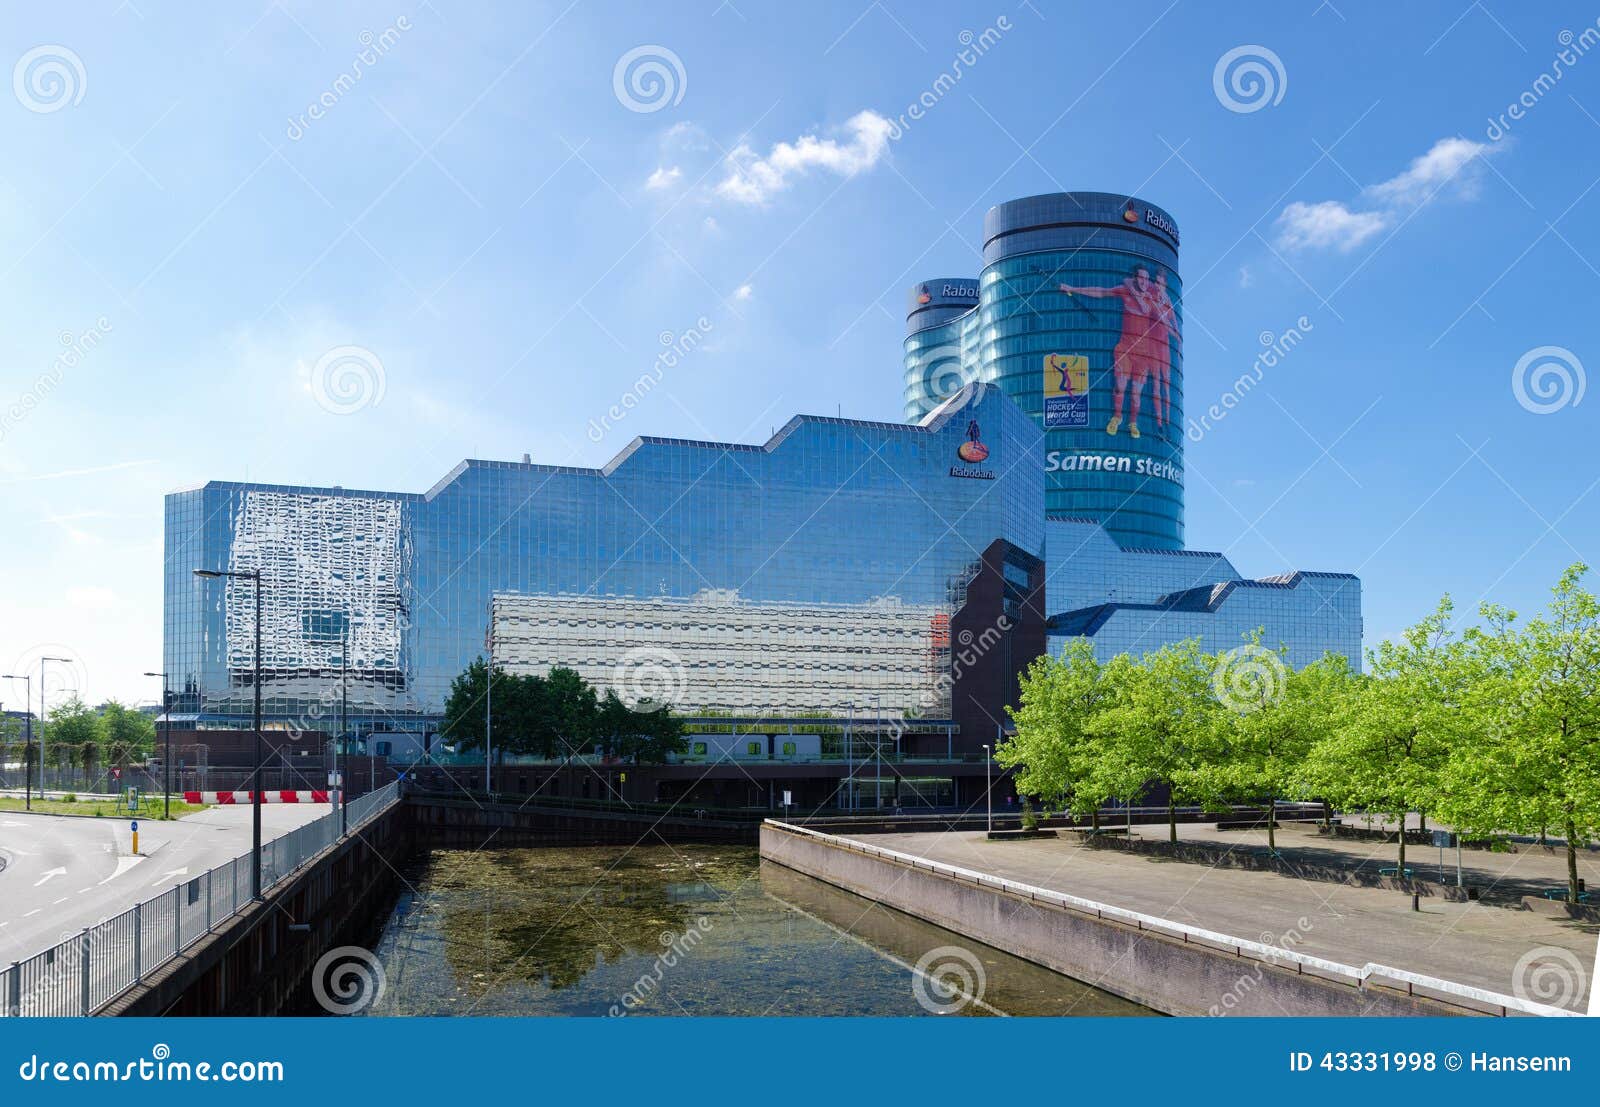 Headquarters of dutch bank editorial stock photo. Image of ...